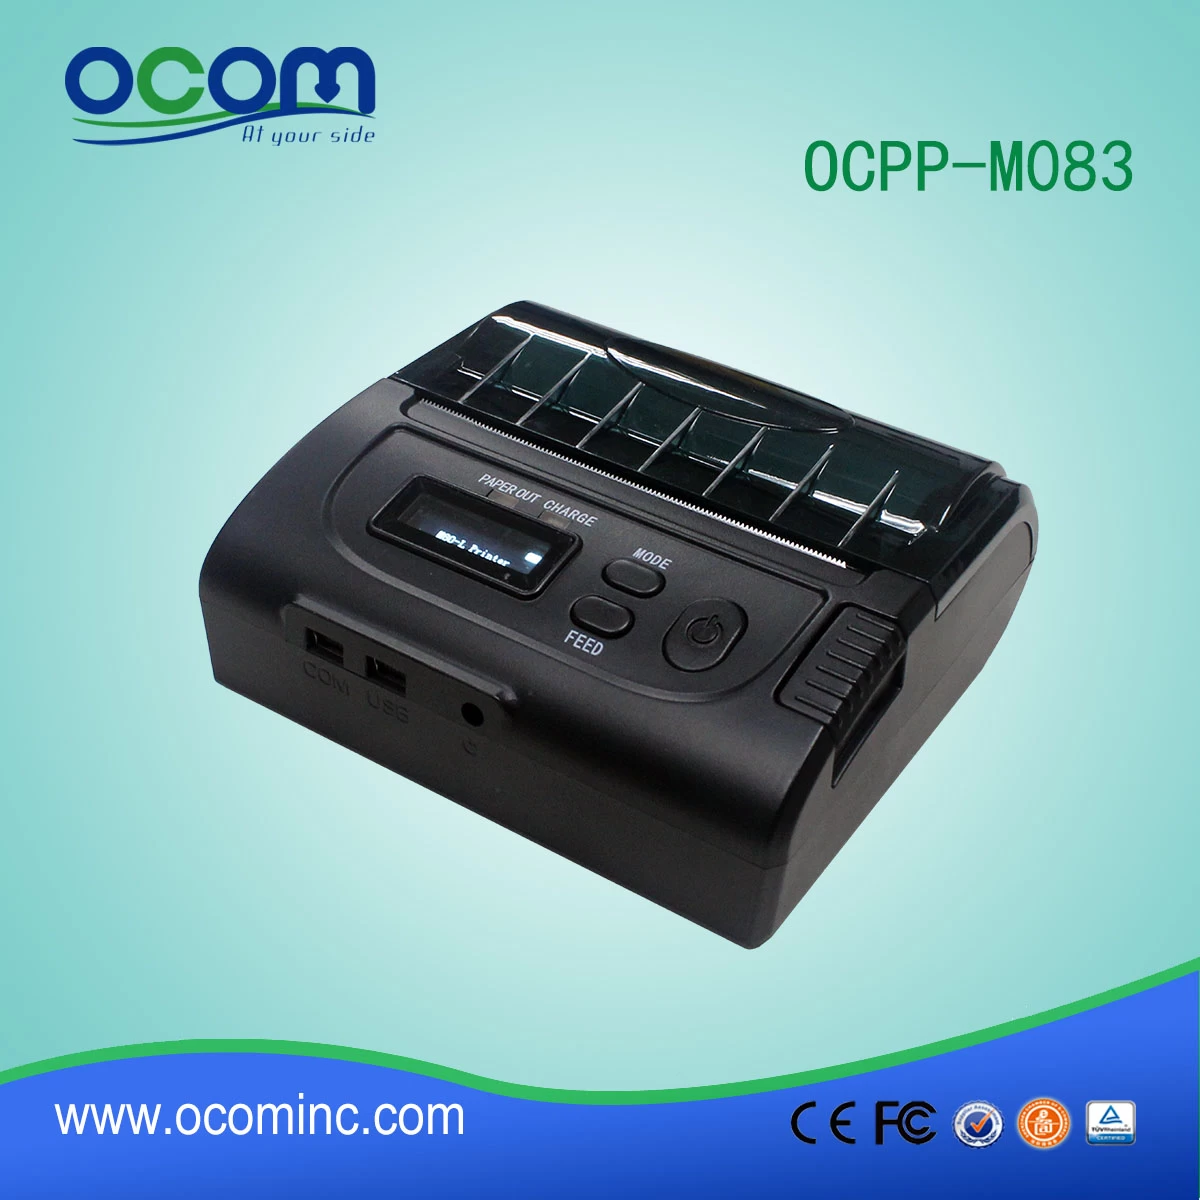 3 inch portable thermal printer for Android device （OCPP-M083）